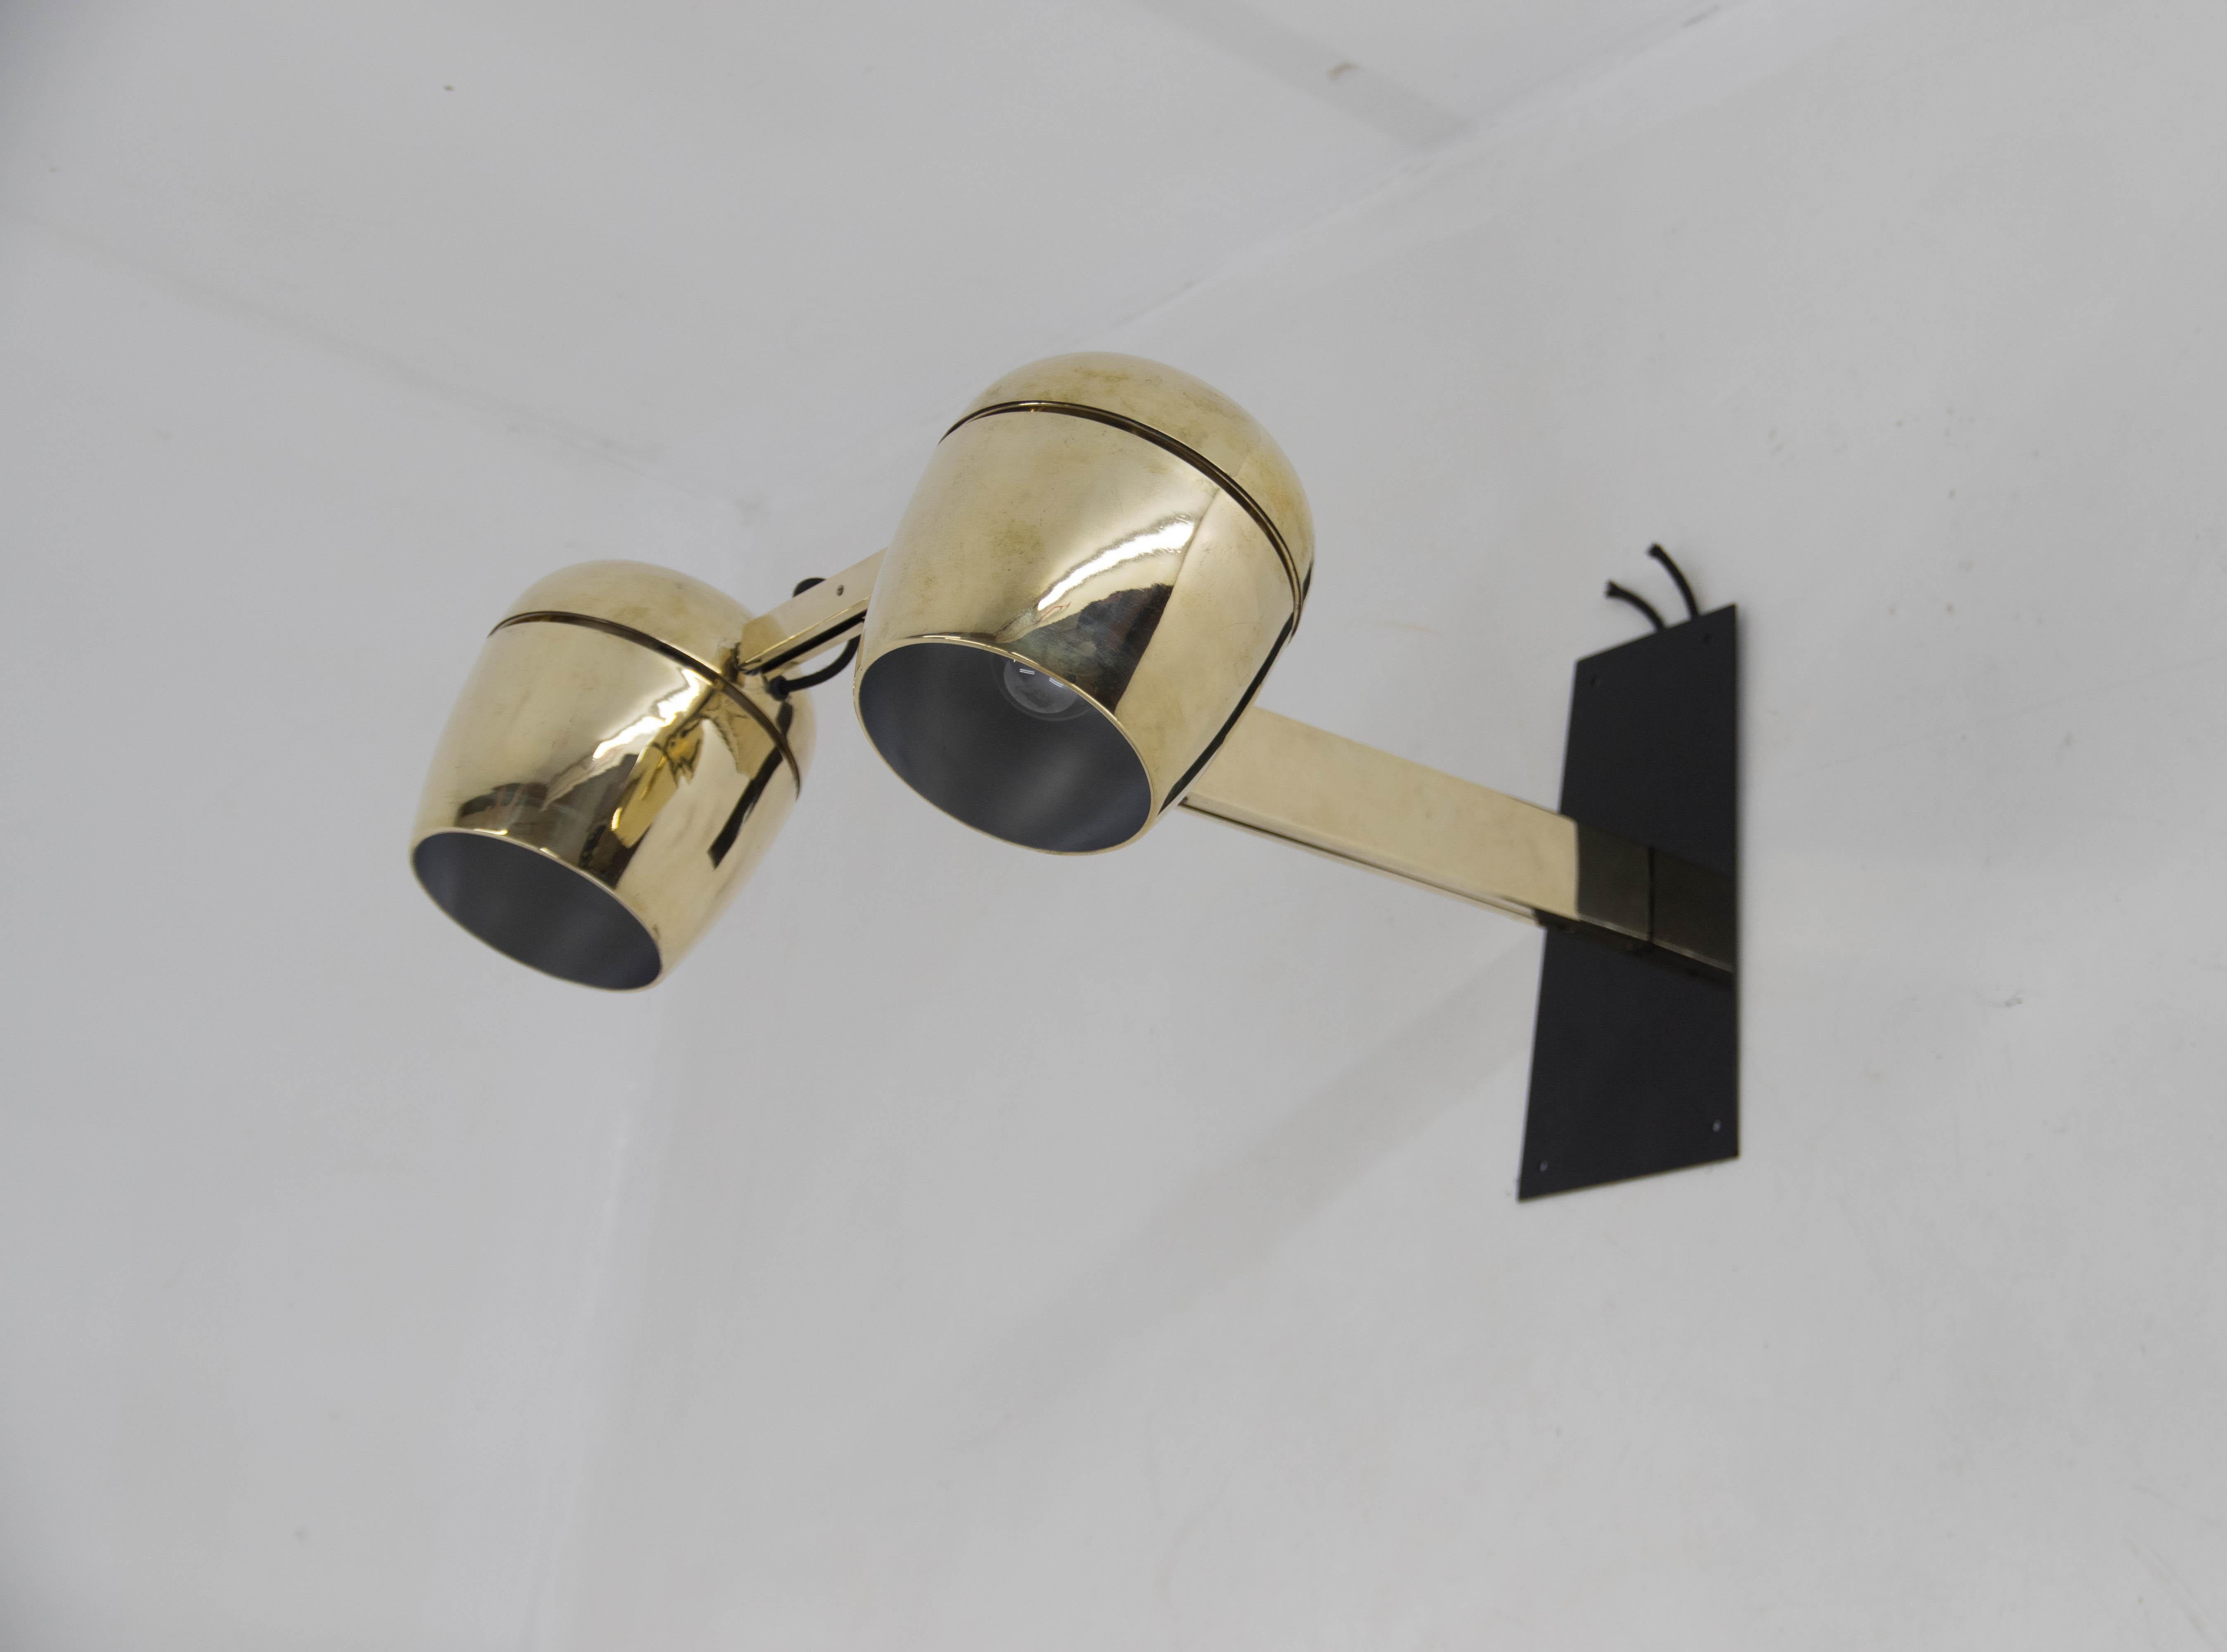 Big wall lamp with two adjustable shades made of polished brass. Made in Czechoslovakia by Napako in 1970s in Brutalist style.
Carefully restored: brass polished, new black paint on a metal wall base.
Rewired: 2x100W, E25-E27 bulb
US wiring